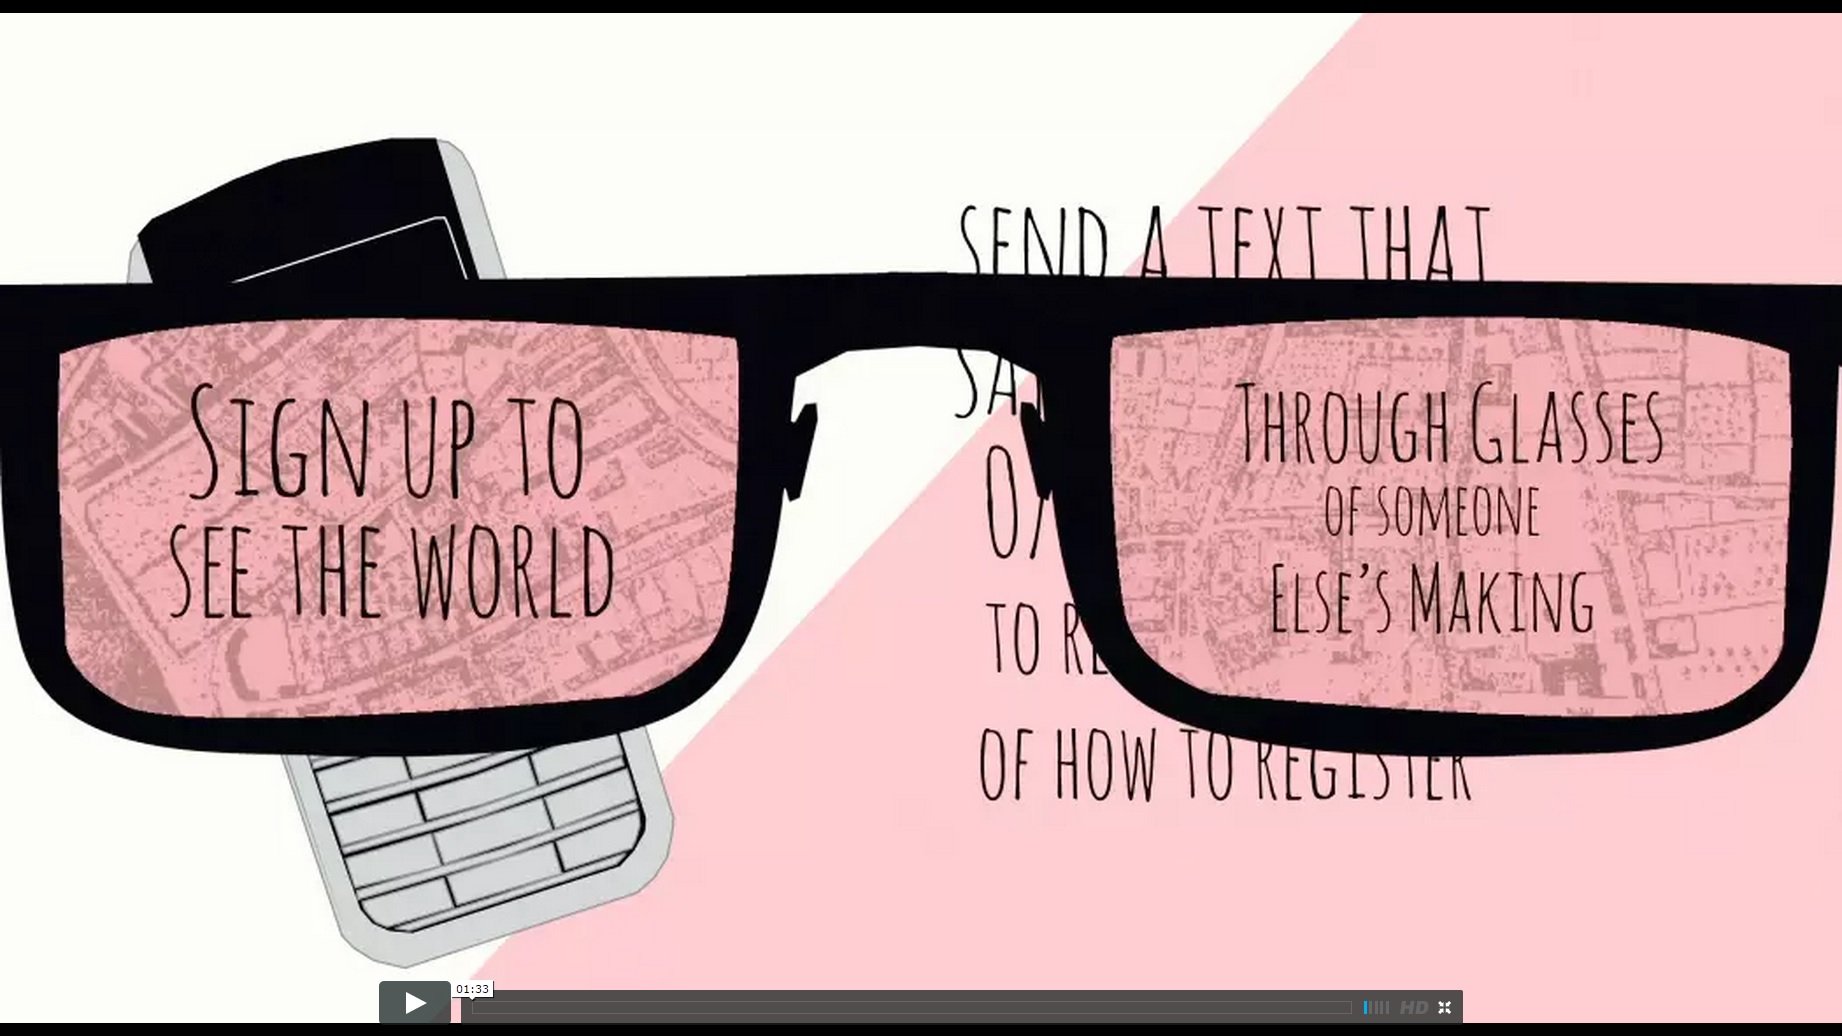 A still from Proto-type Theater's 'Fortnight', showing 'rosy-tinted' glasses and the instruction to 'see the world through glasses of someone else's making'.